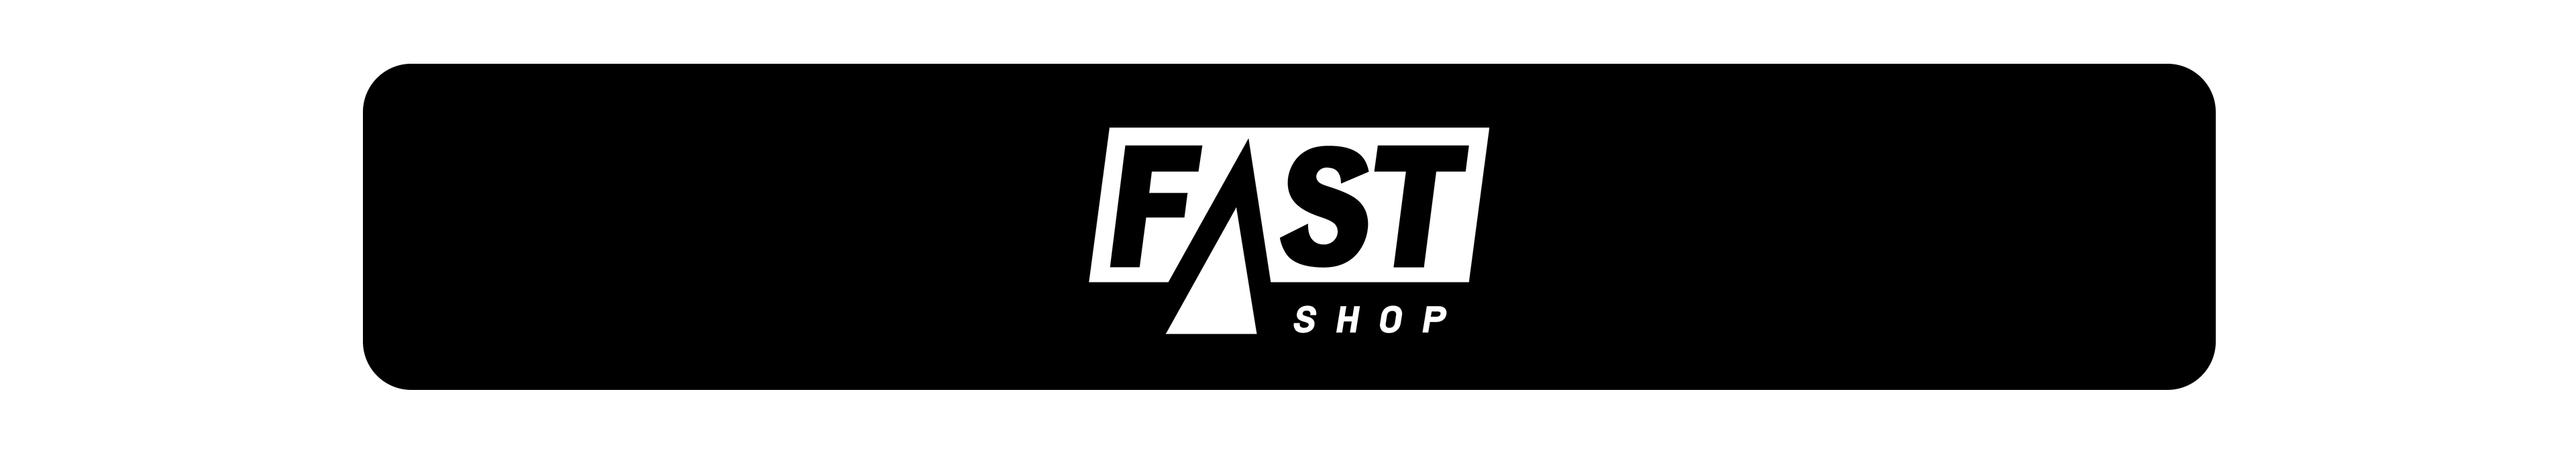 Fast Shop - externo